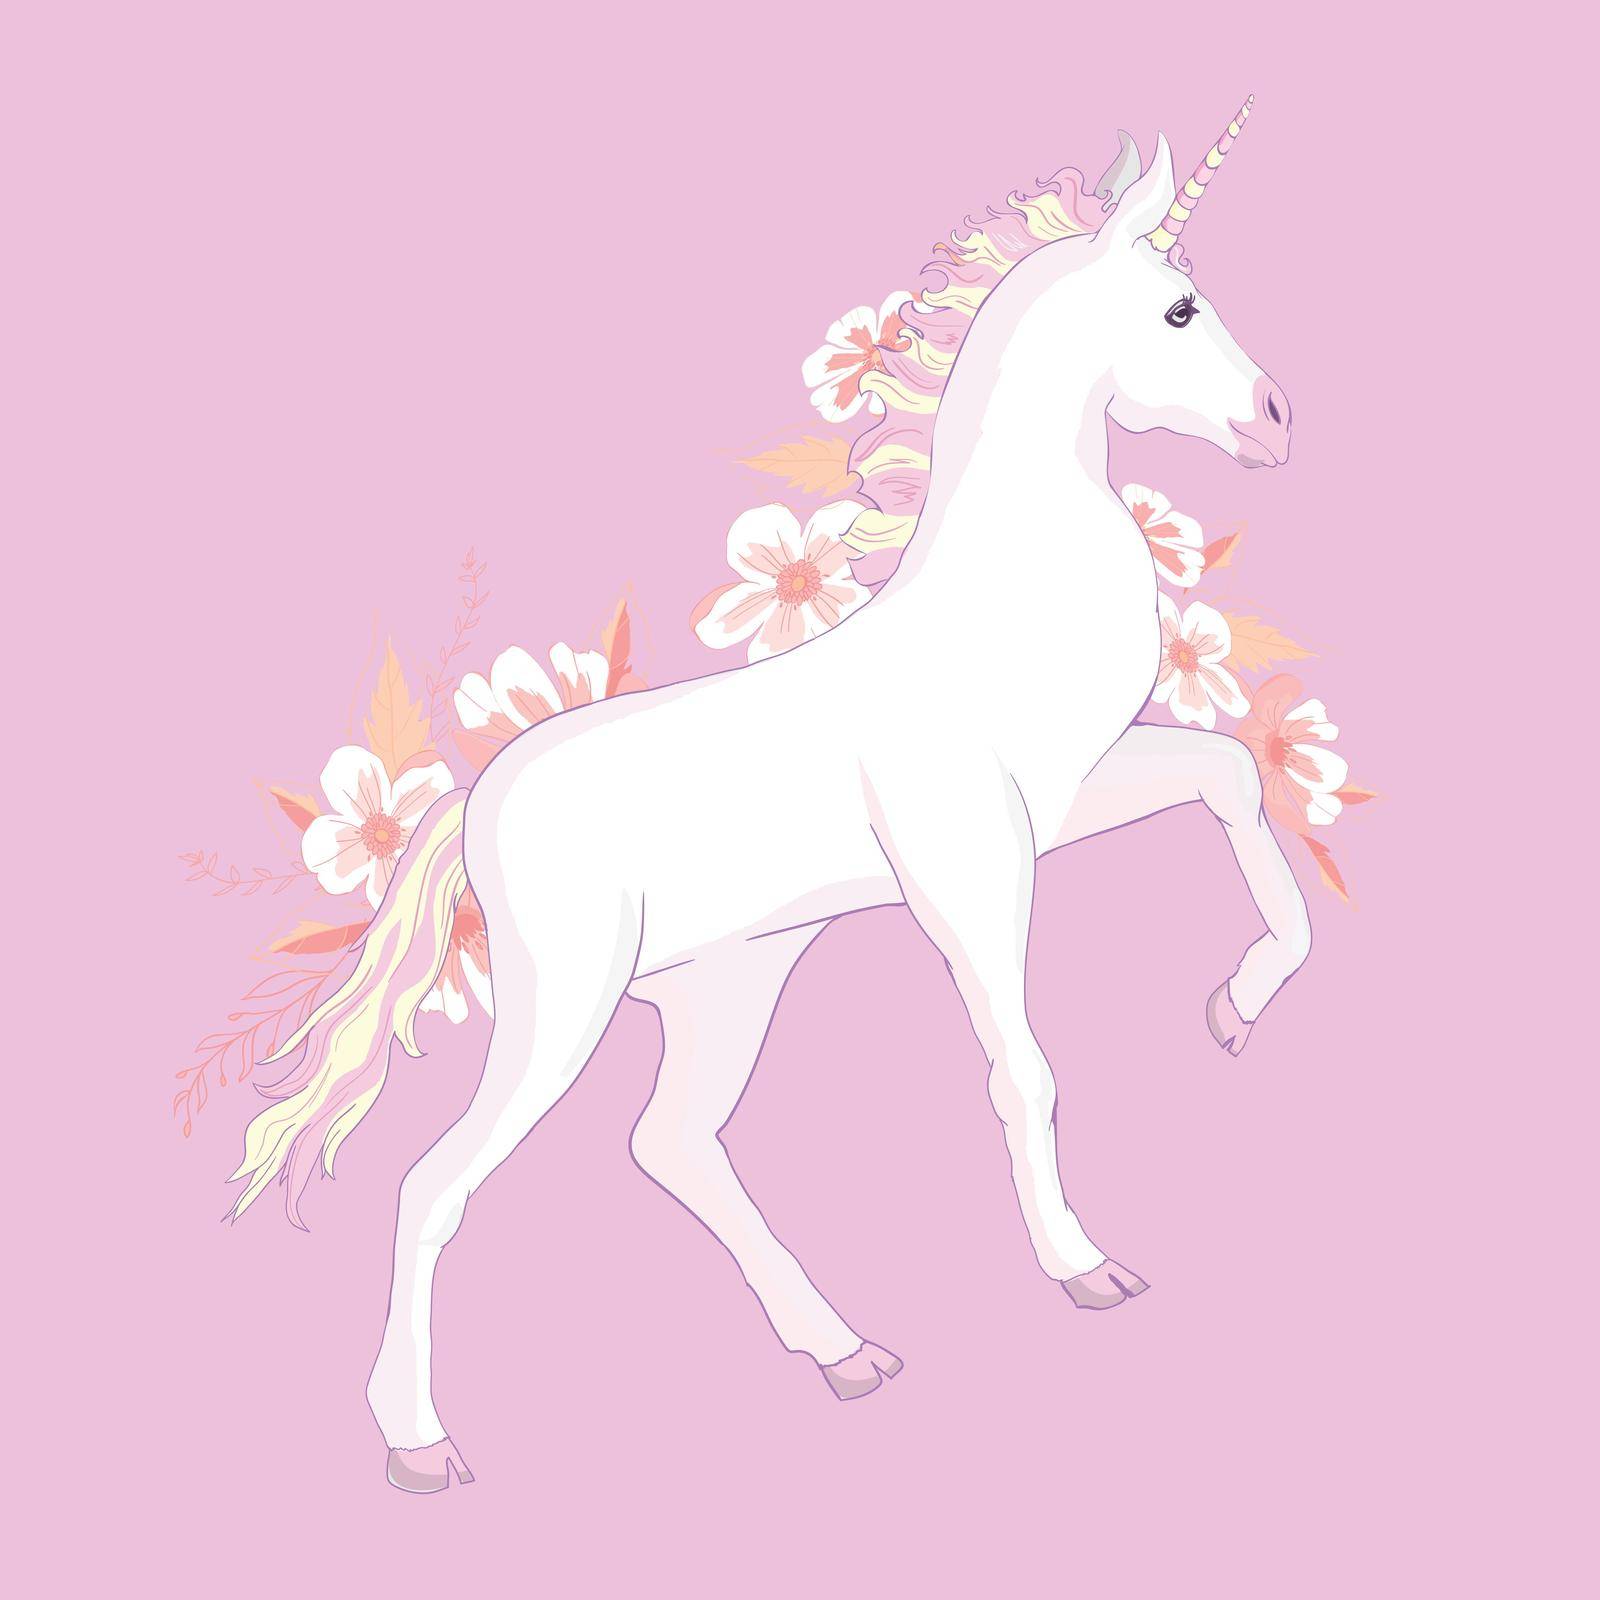 unicorn vector head with mane and horn on floral background.